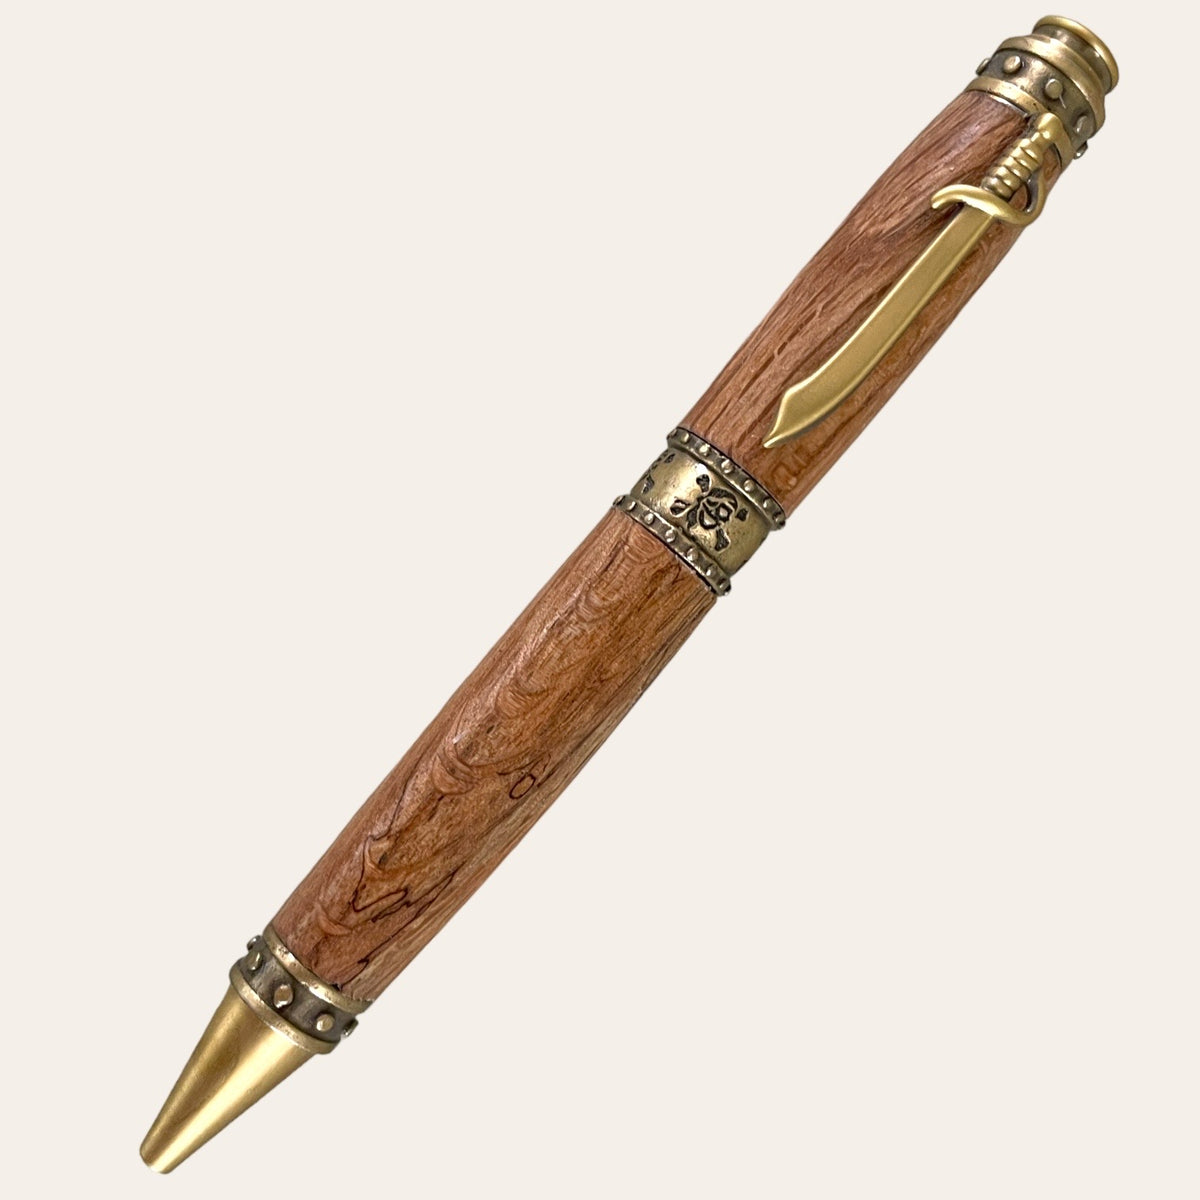 Pirate pen trimmed in gold and is hand turned out of Laurel Oak wood. Paul's Hand Turned Creations